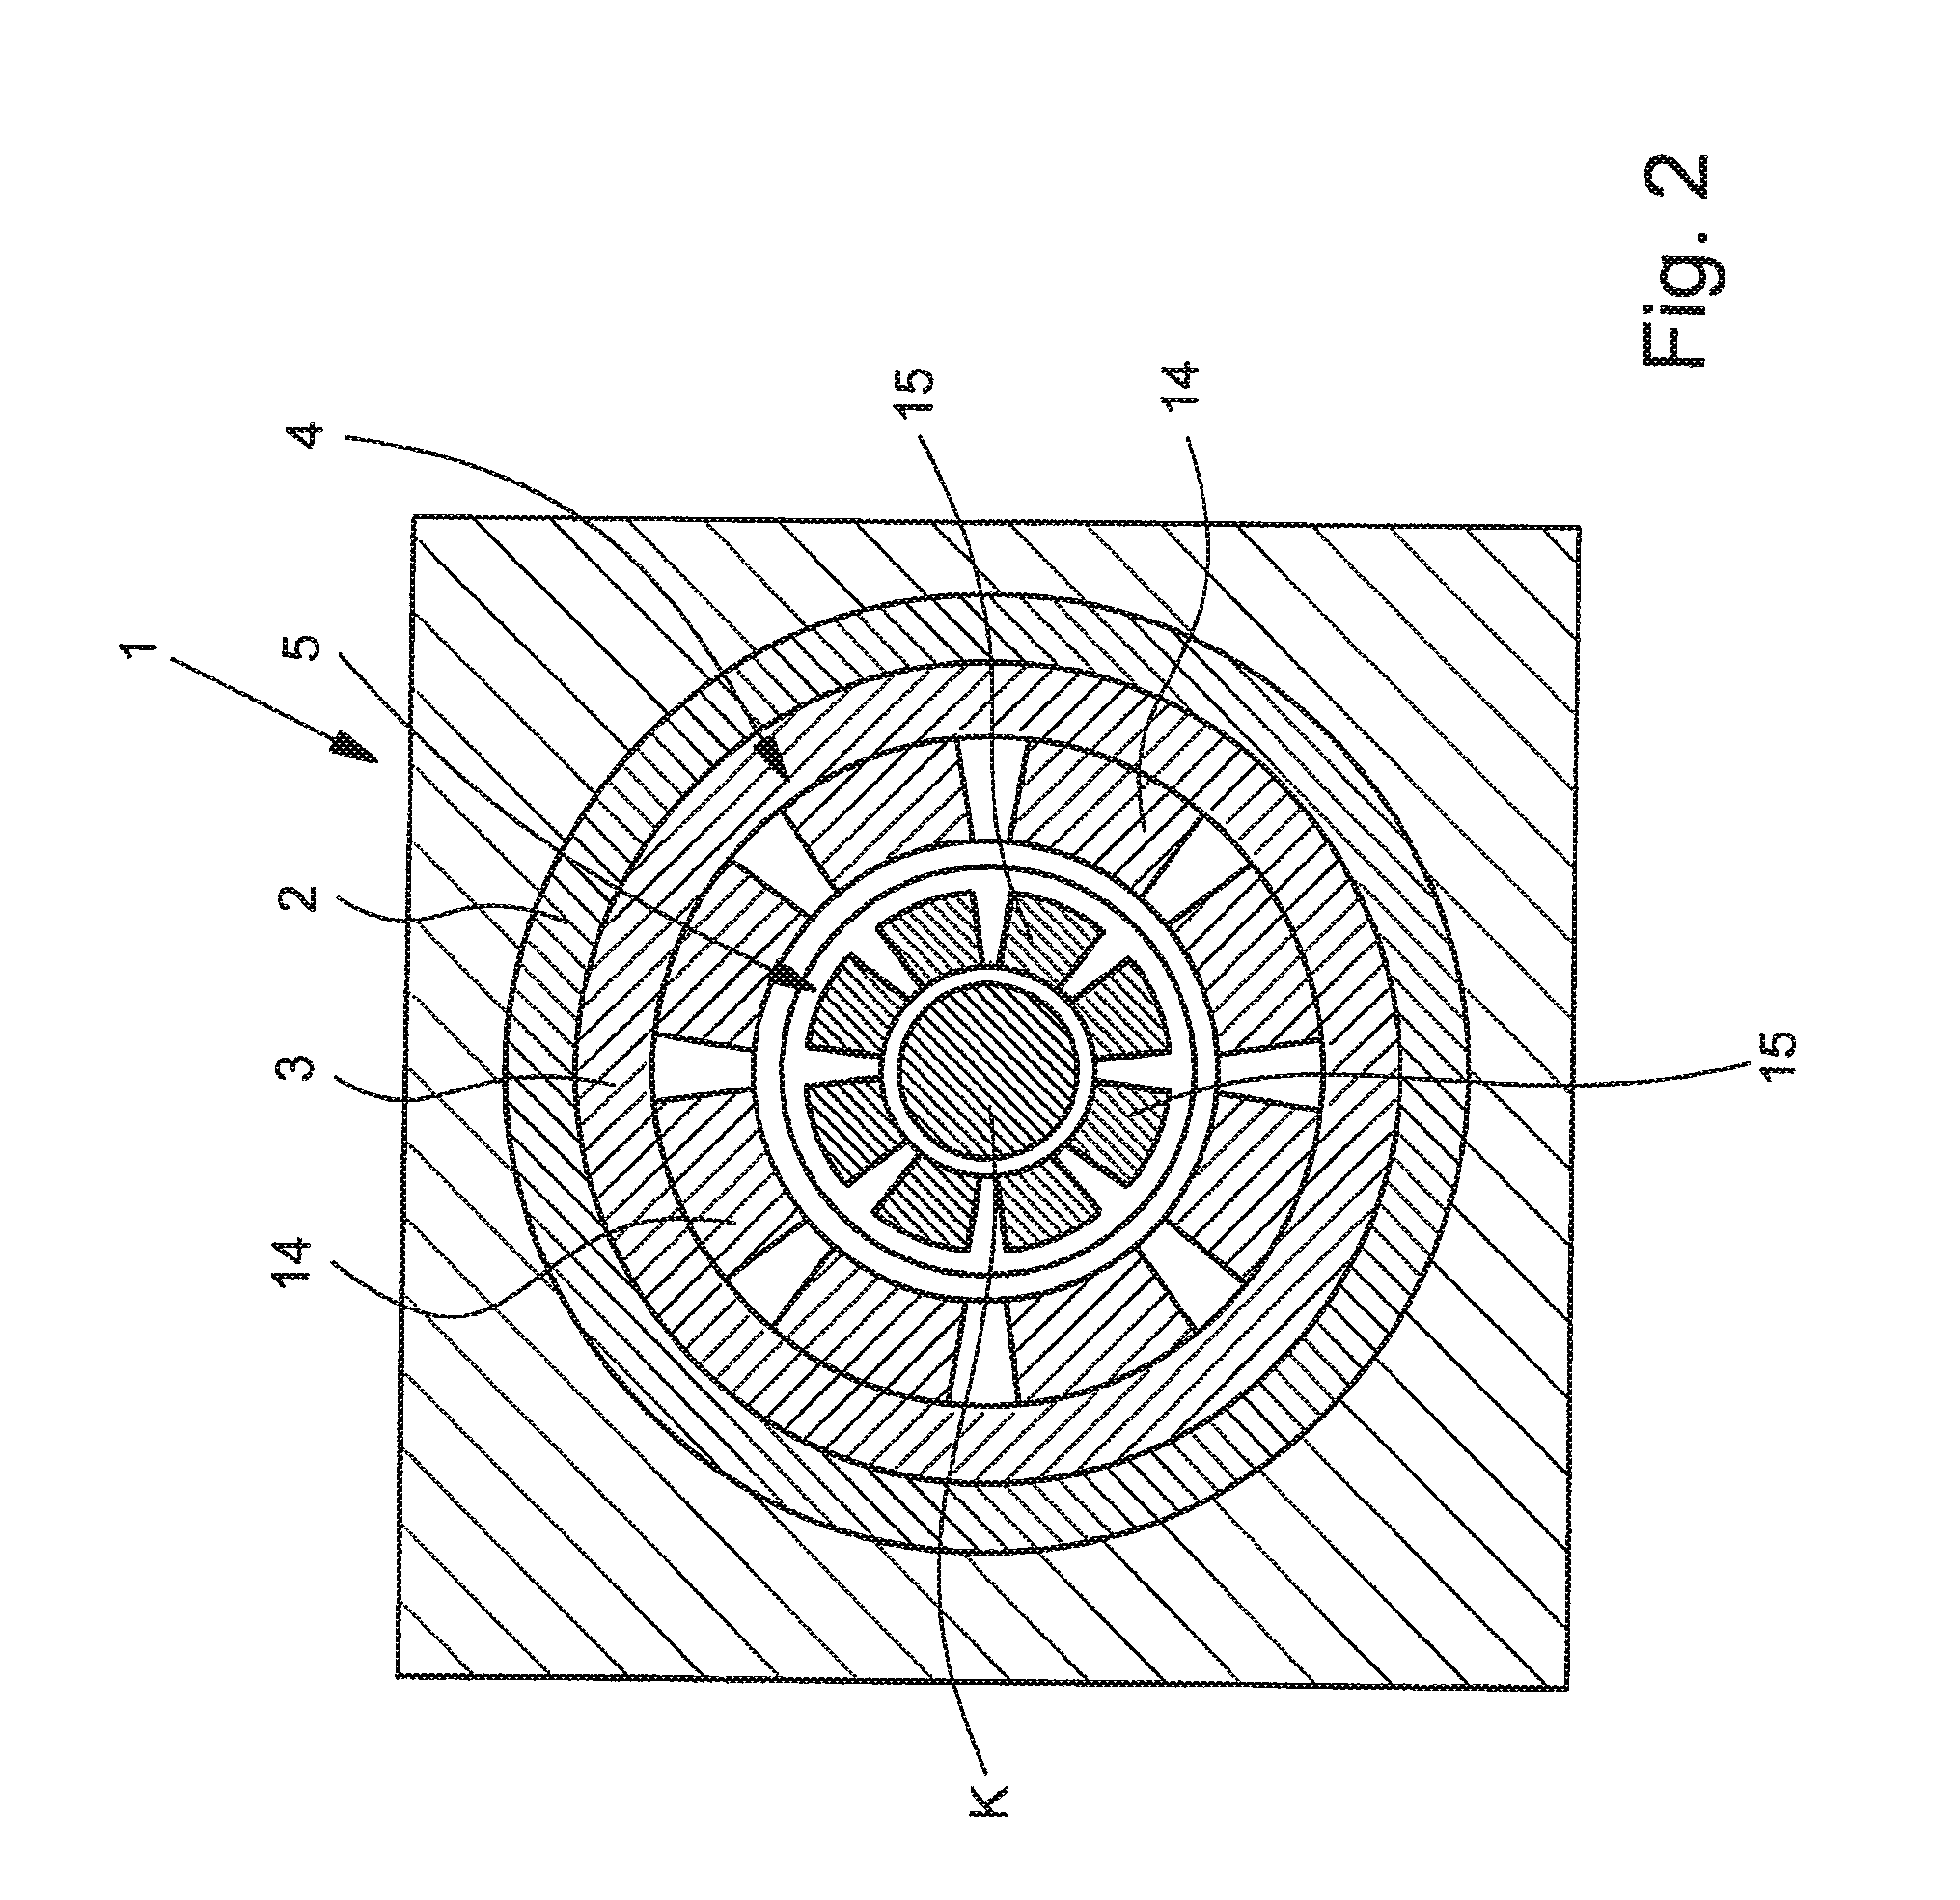 Magnetic resonance imaging apparatus, evaluation device, and method